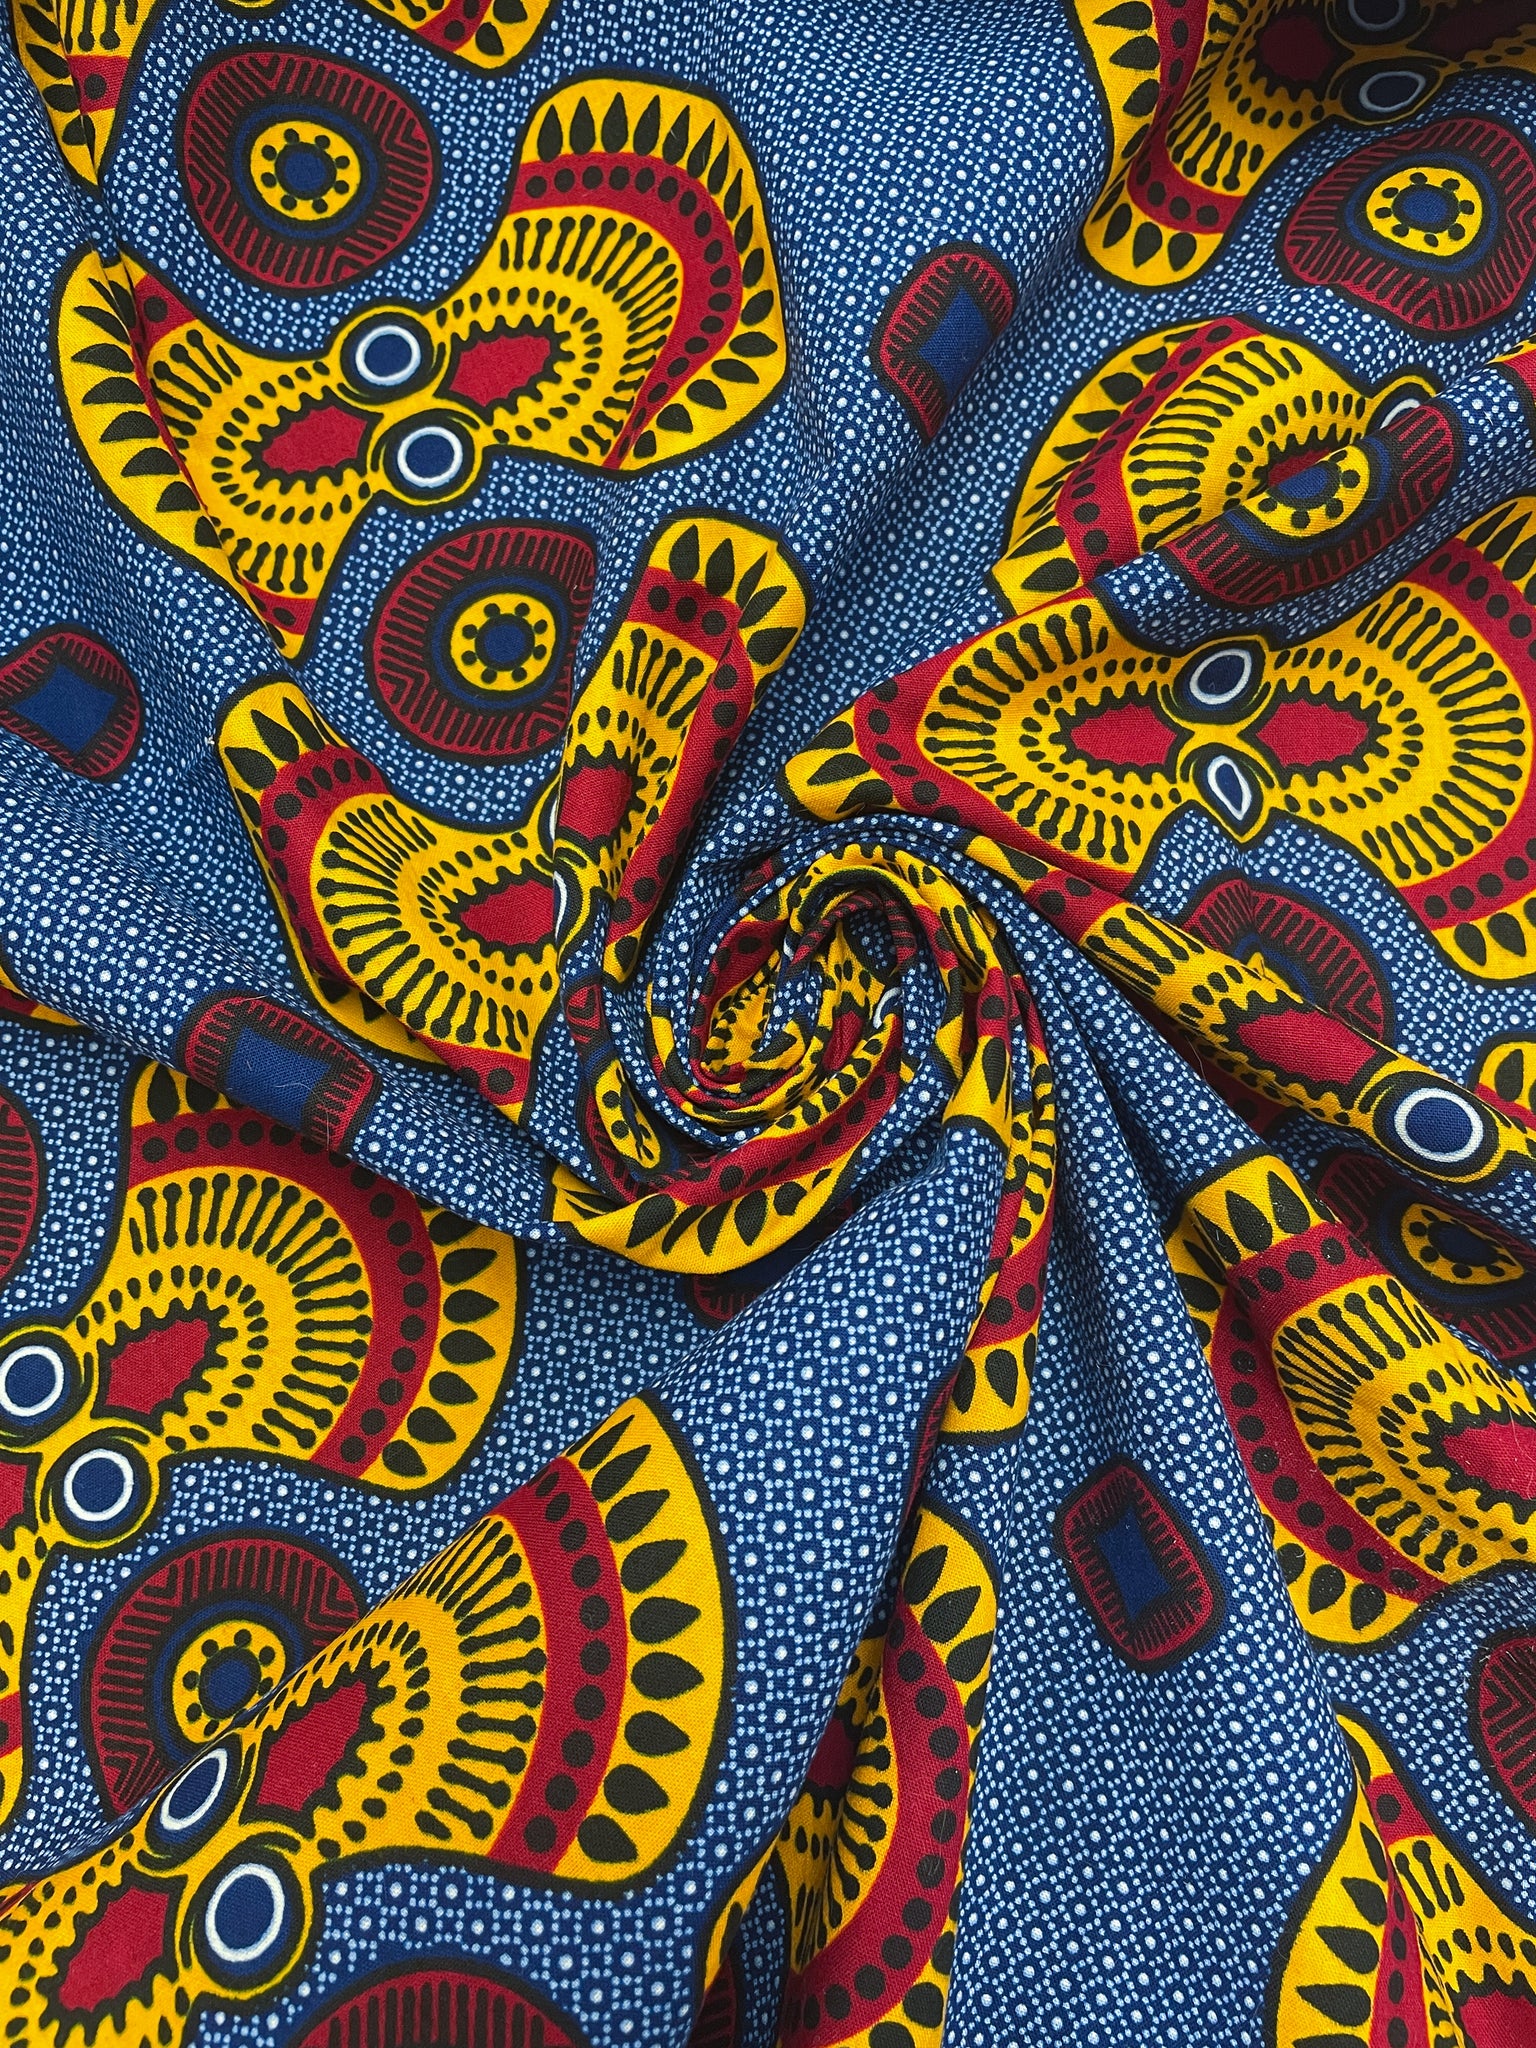 Cotton Wax Block Print - Royal Blue, Golden Yellow and Red